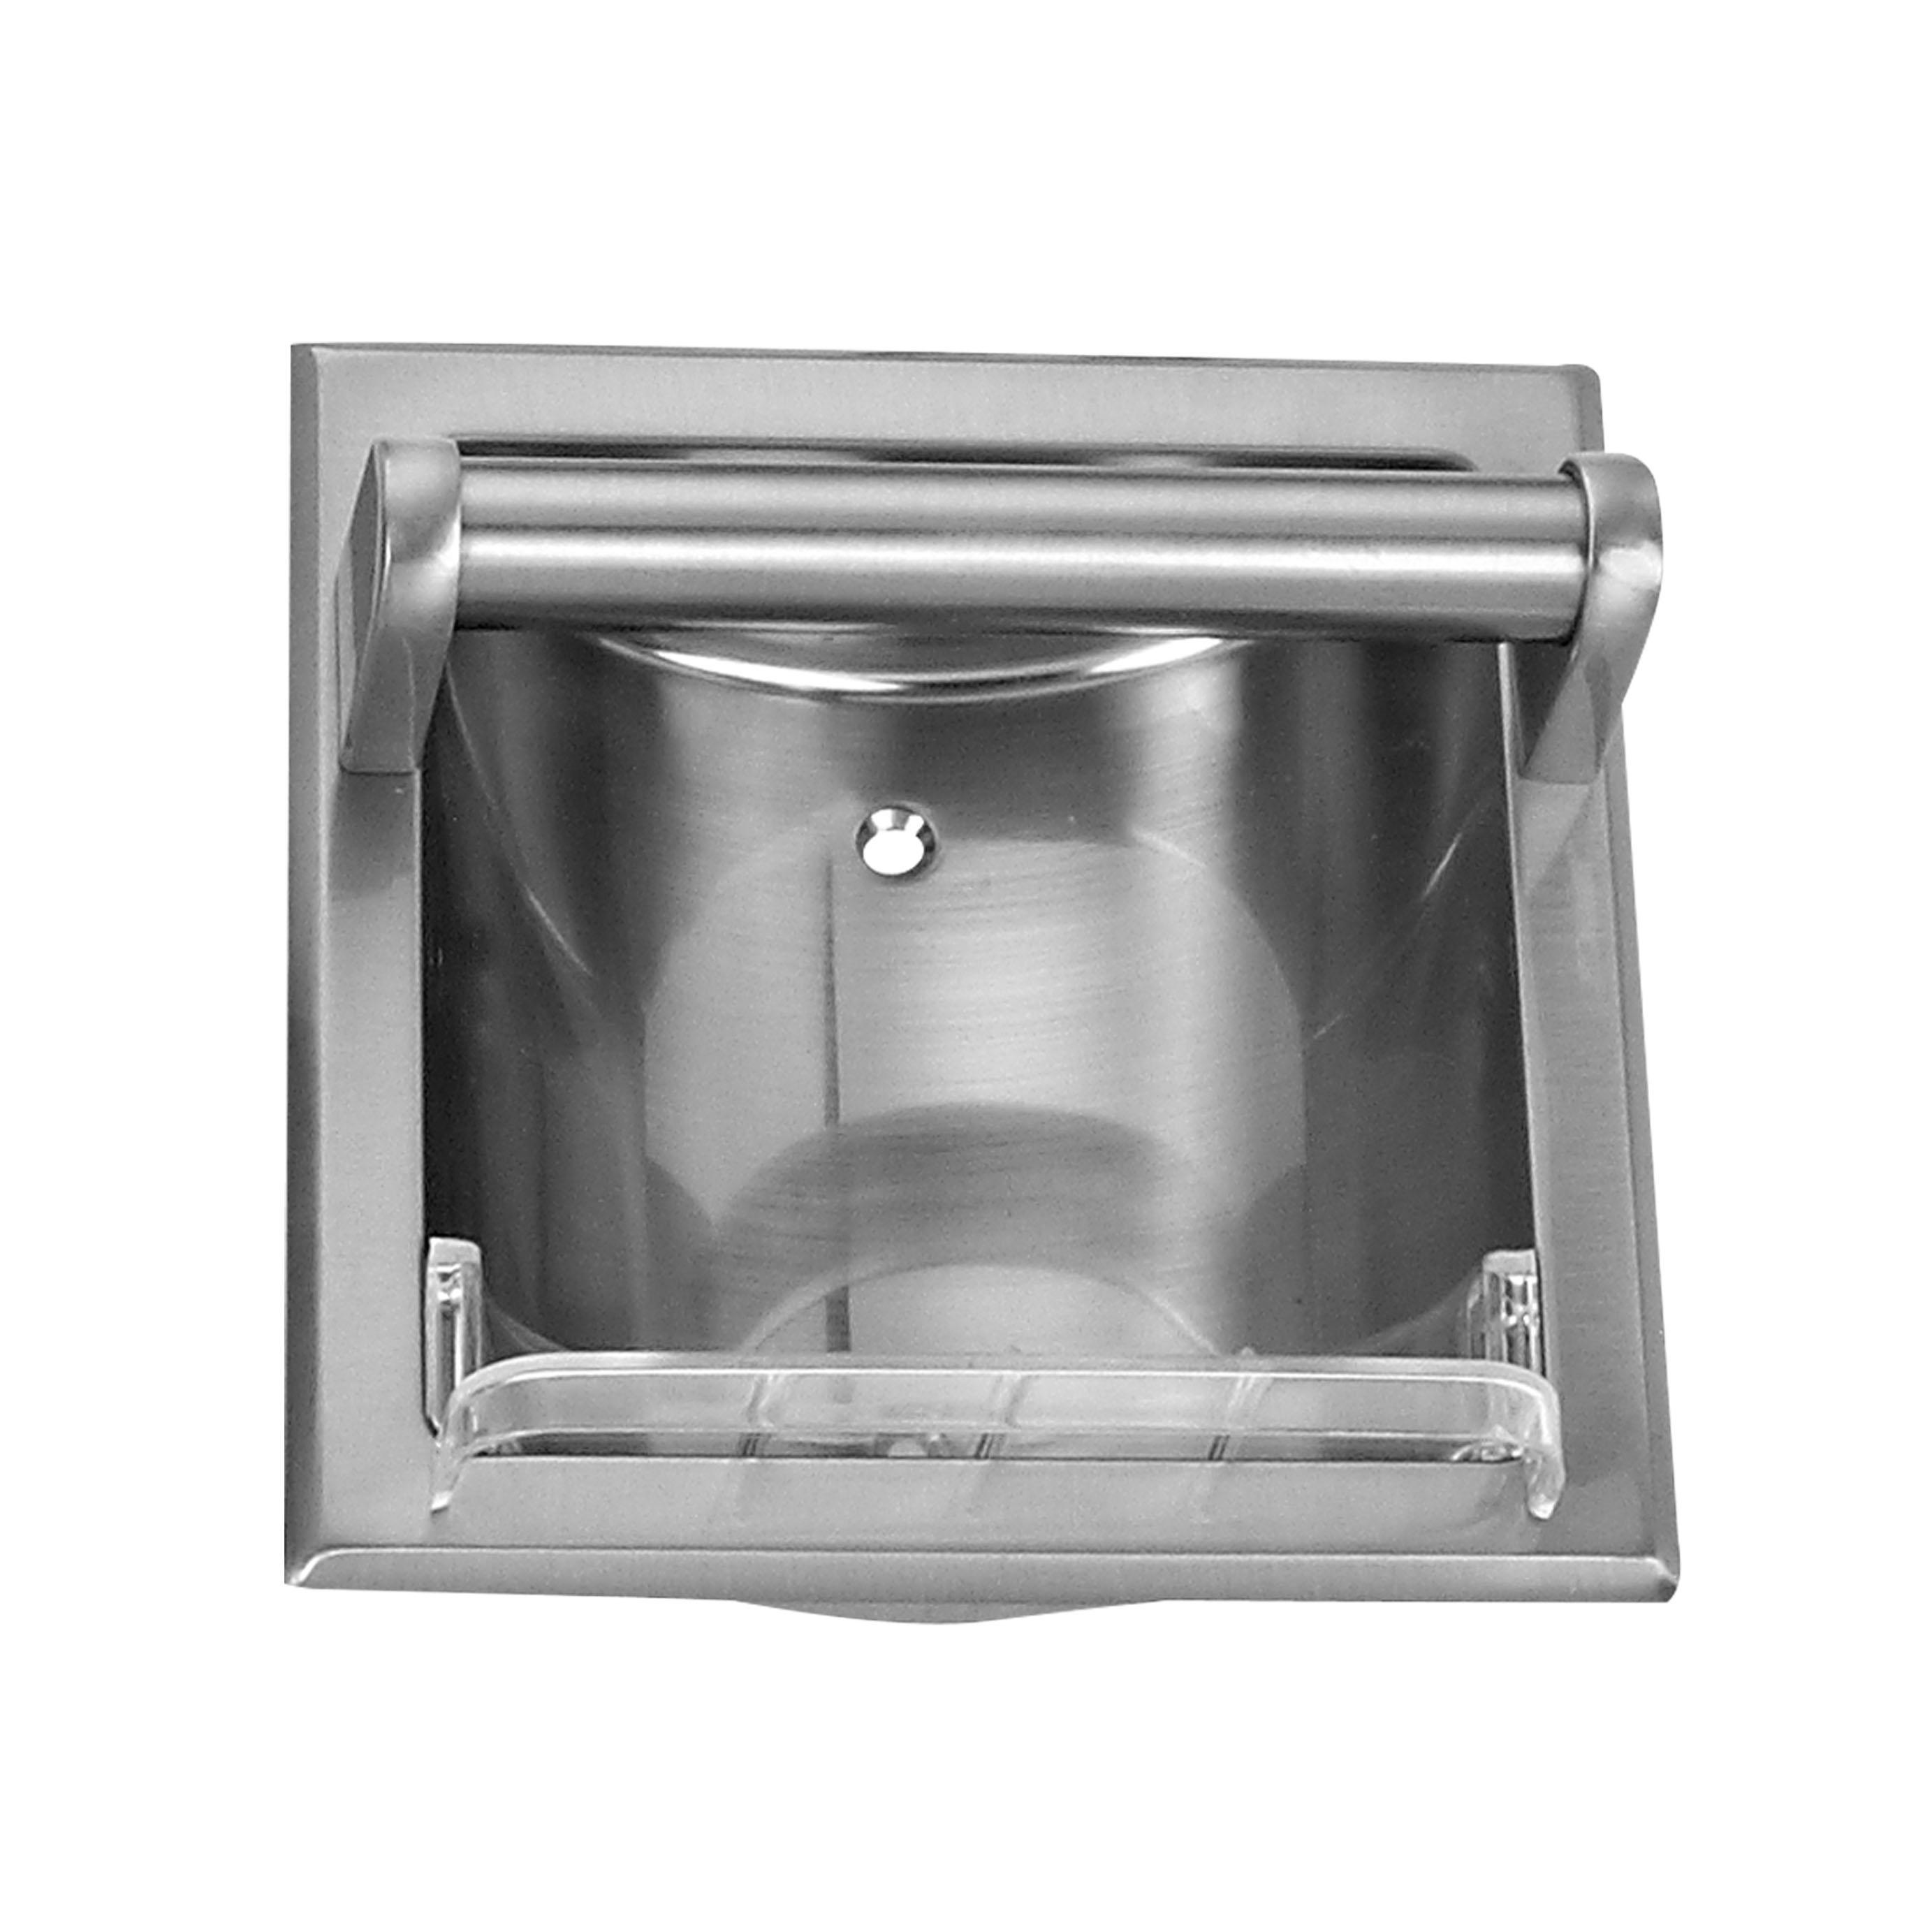 770H-07-SOU Soap Holder and Grab Bar, Recessed Mounting, Plastic Roller/Zinc, Brushed Nickel Finish